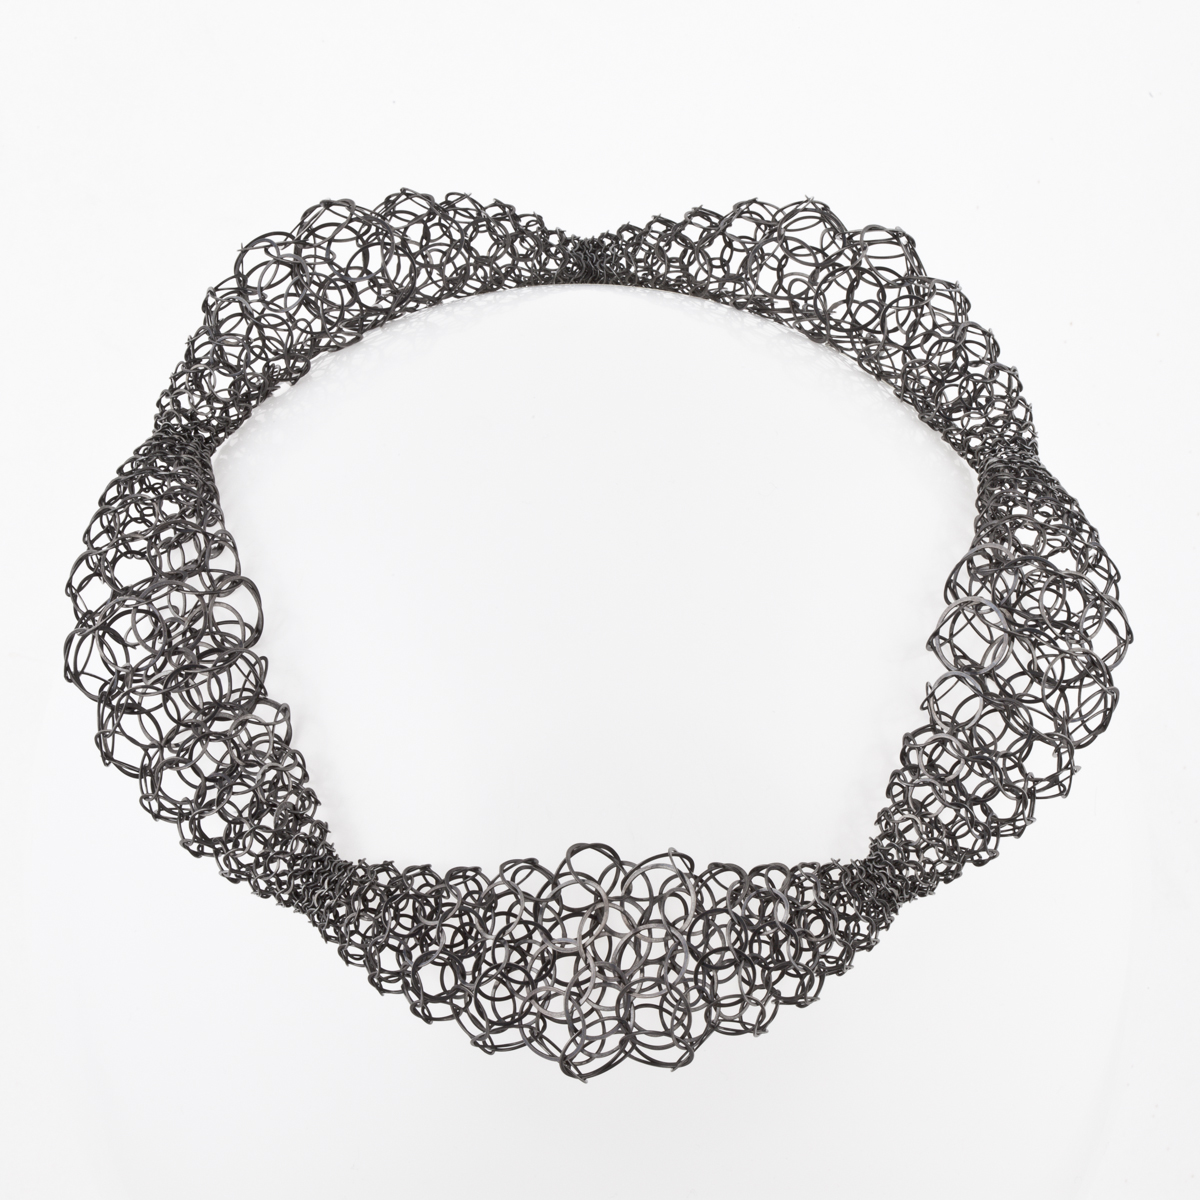 Aird necklace | Contemporary Necklaces / Pendants by Joanne Thompson ...